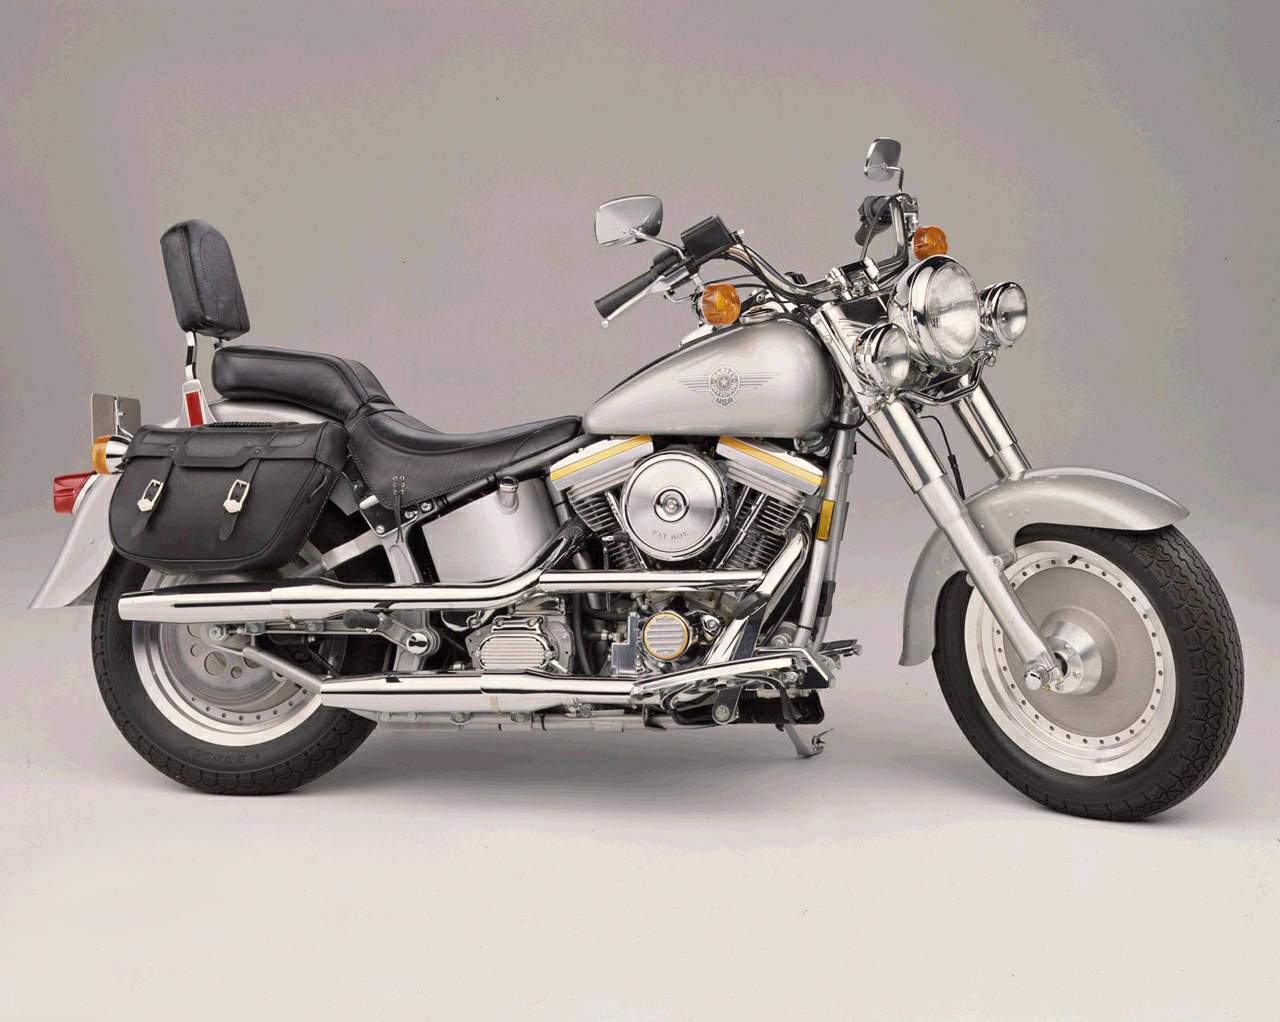 Harley Fat Boy 1994 Buy Clothes Shoes Online